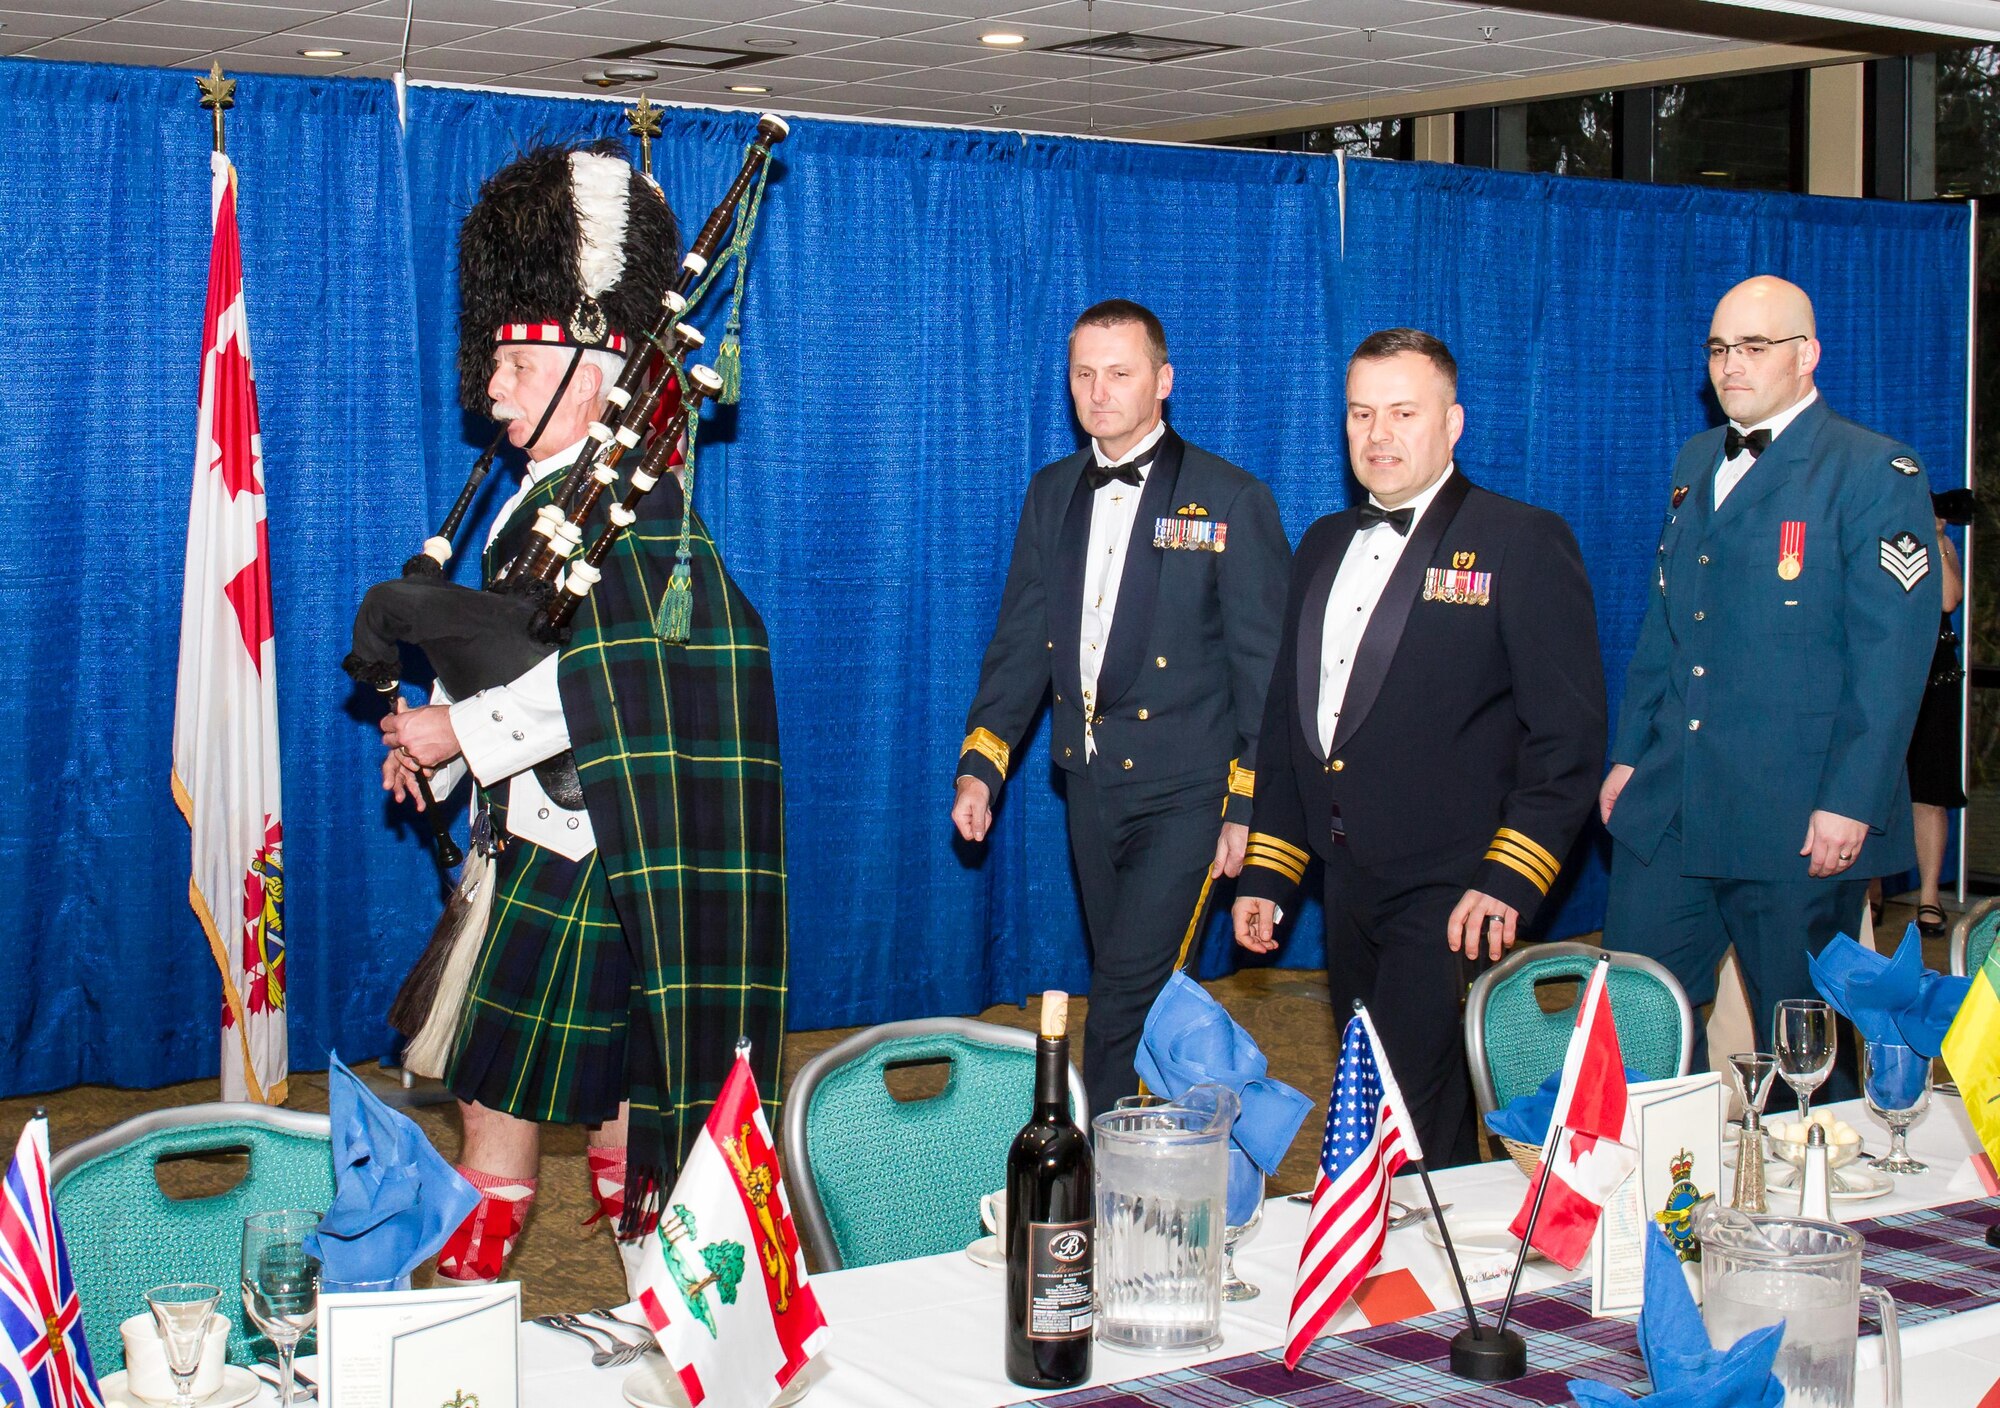 Canadian Brig. Gen. David Cochrane (second from left), 2nd Canadian Air Division commander and Canadian Lt. Col. Matt Wappler (second from right), Western Air Defense Sector Canadian Detachment commander, are led by bagpiper Van Bradley symbolizing the start of the Canadian Mess Dinner.  The annual dinner marked the 93rd anniversary of the formation of the Royal Canadian Air Force (RCAF).  At the end of the night, Cochrane formally recognized WADS with the 2nd CAD Commander’s Unit Commendation for providing critical live and virtual training to Canadian aerospace controllers from the 51 Aerospace Control and Warning (Operational Training) Squadron located in North Bay, Ontario. (Courtesy photo by Conrad Neumann III)